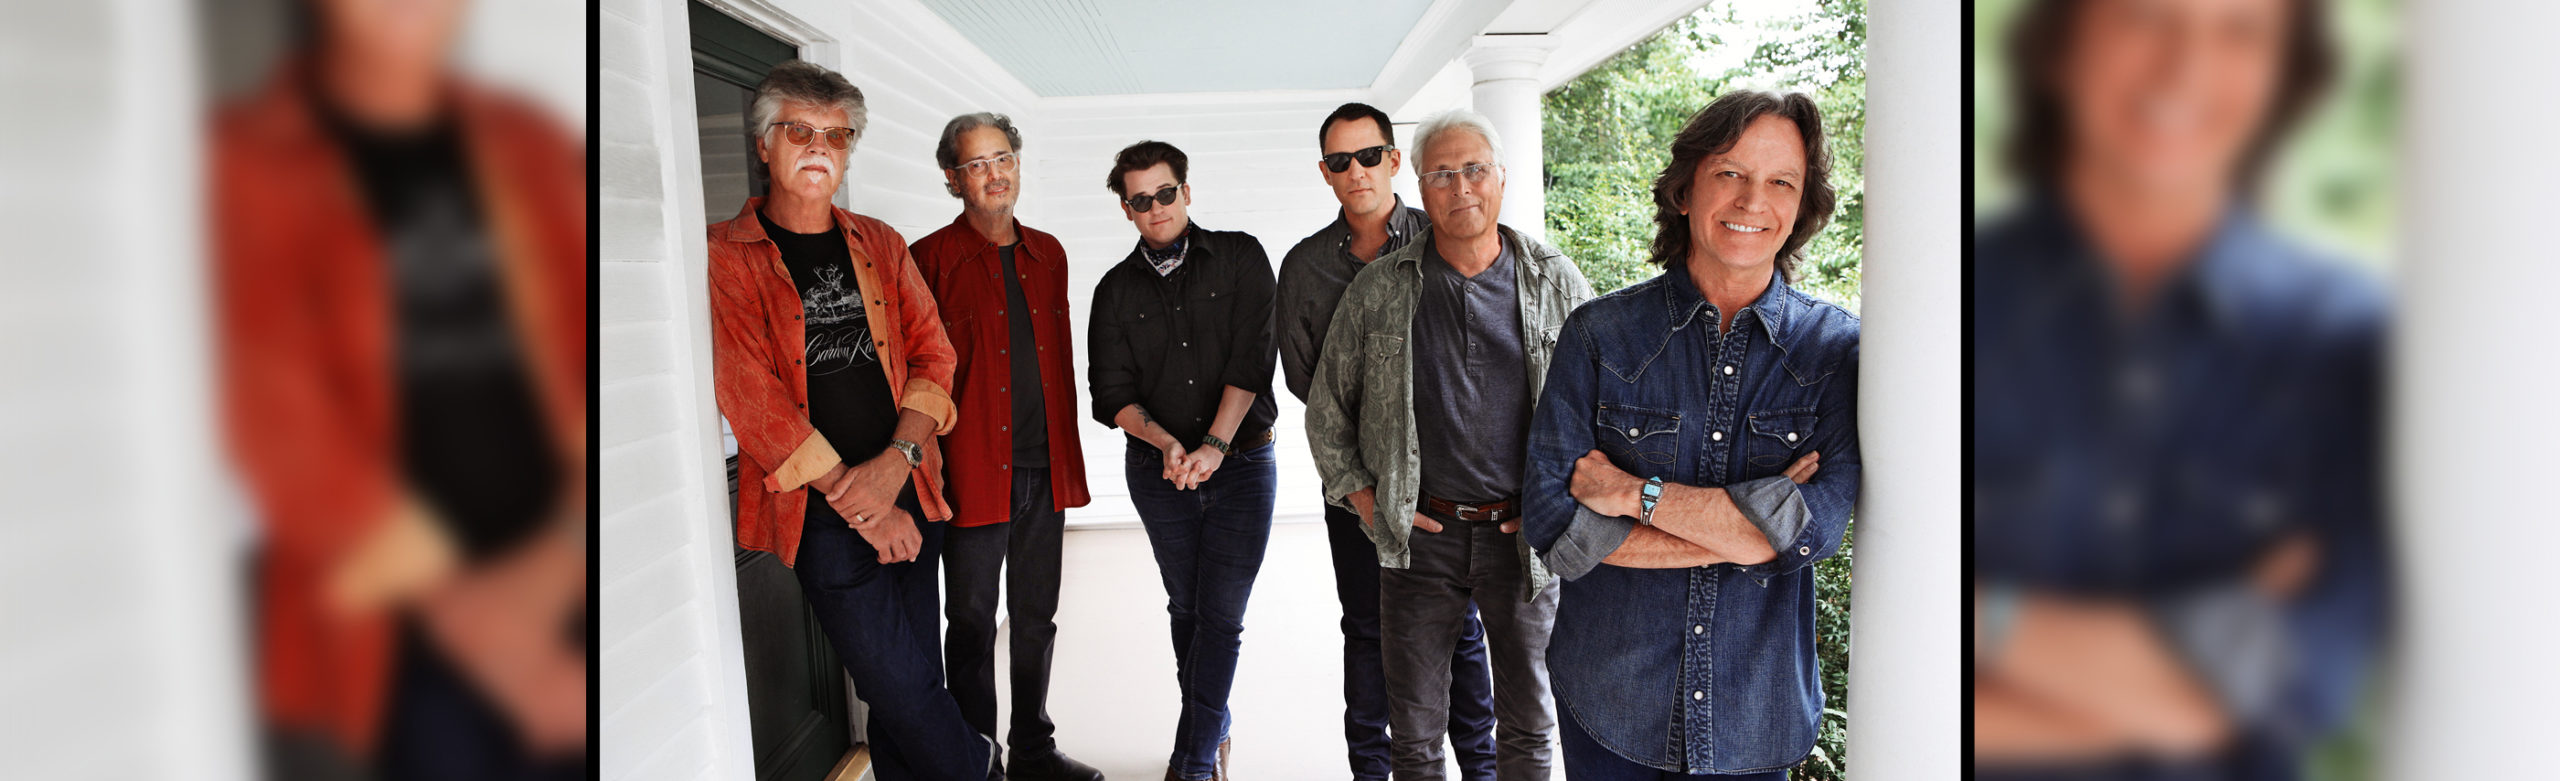 Event Info: Nitty Gritty Dirt Band at the Wilma 2019 Image